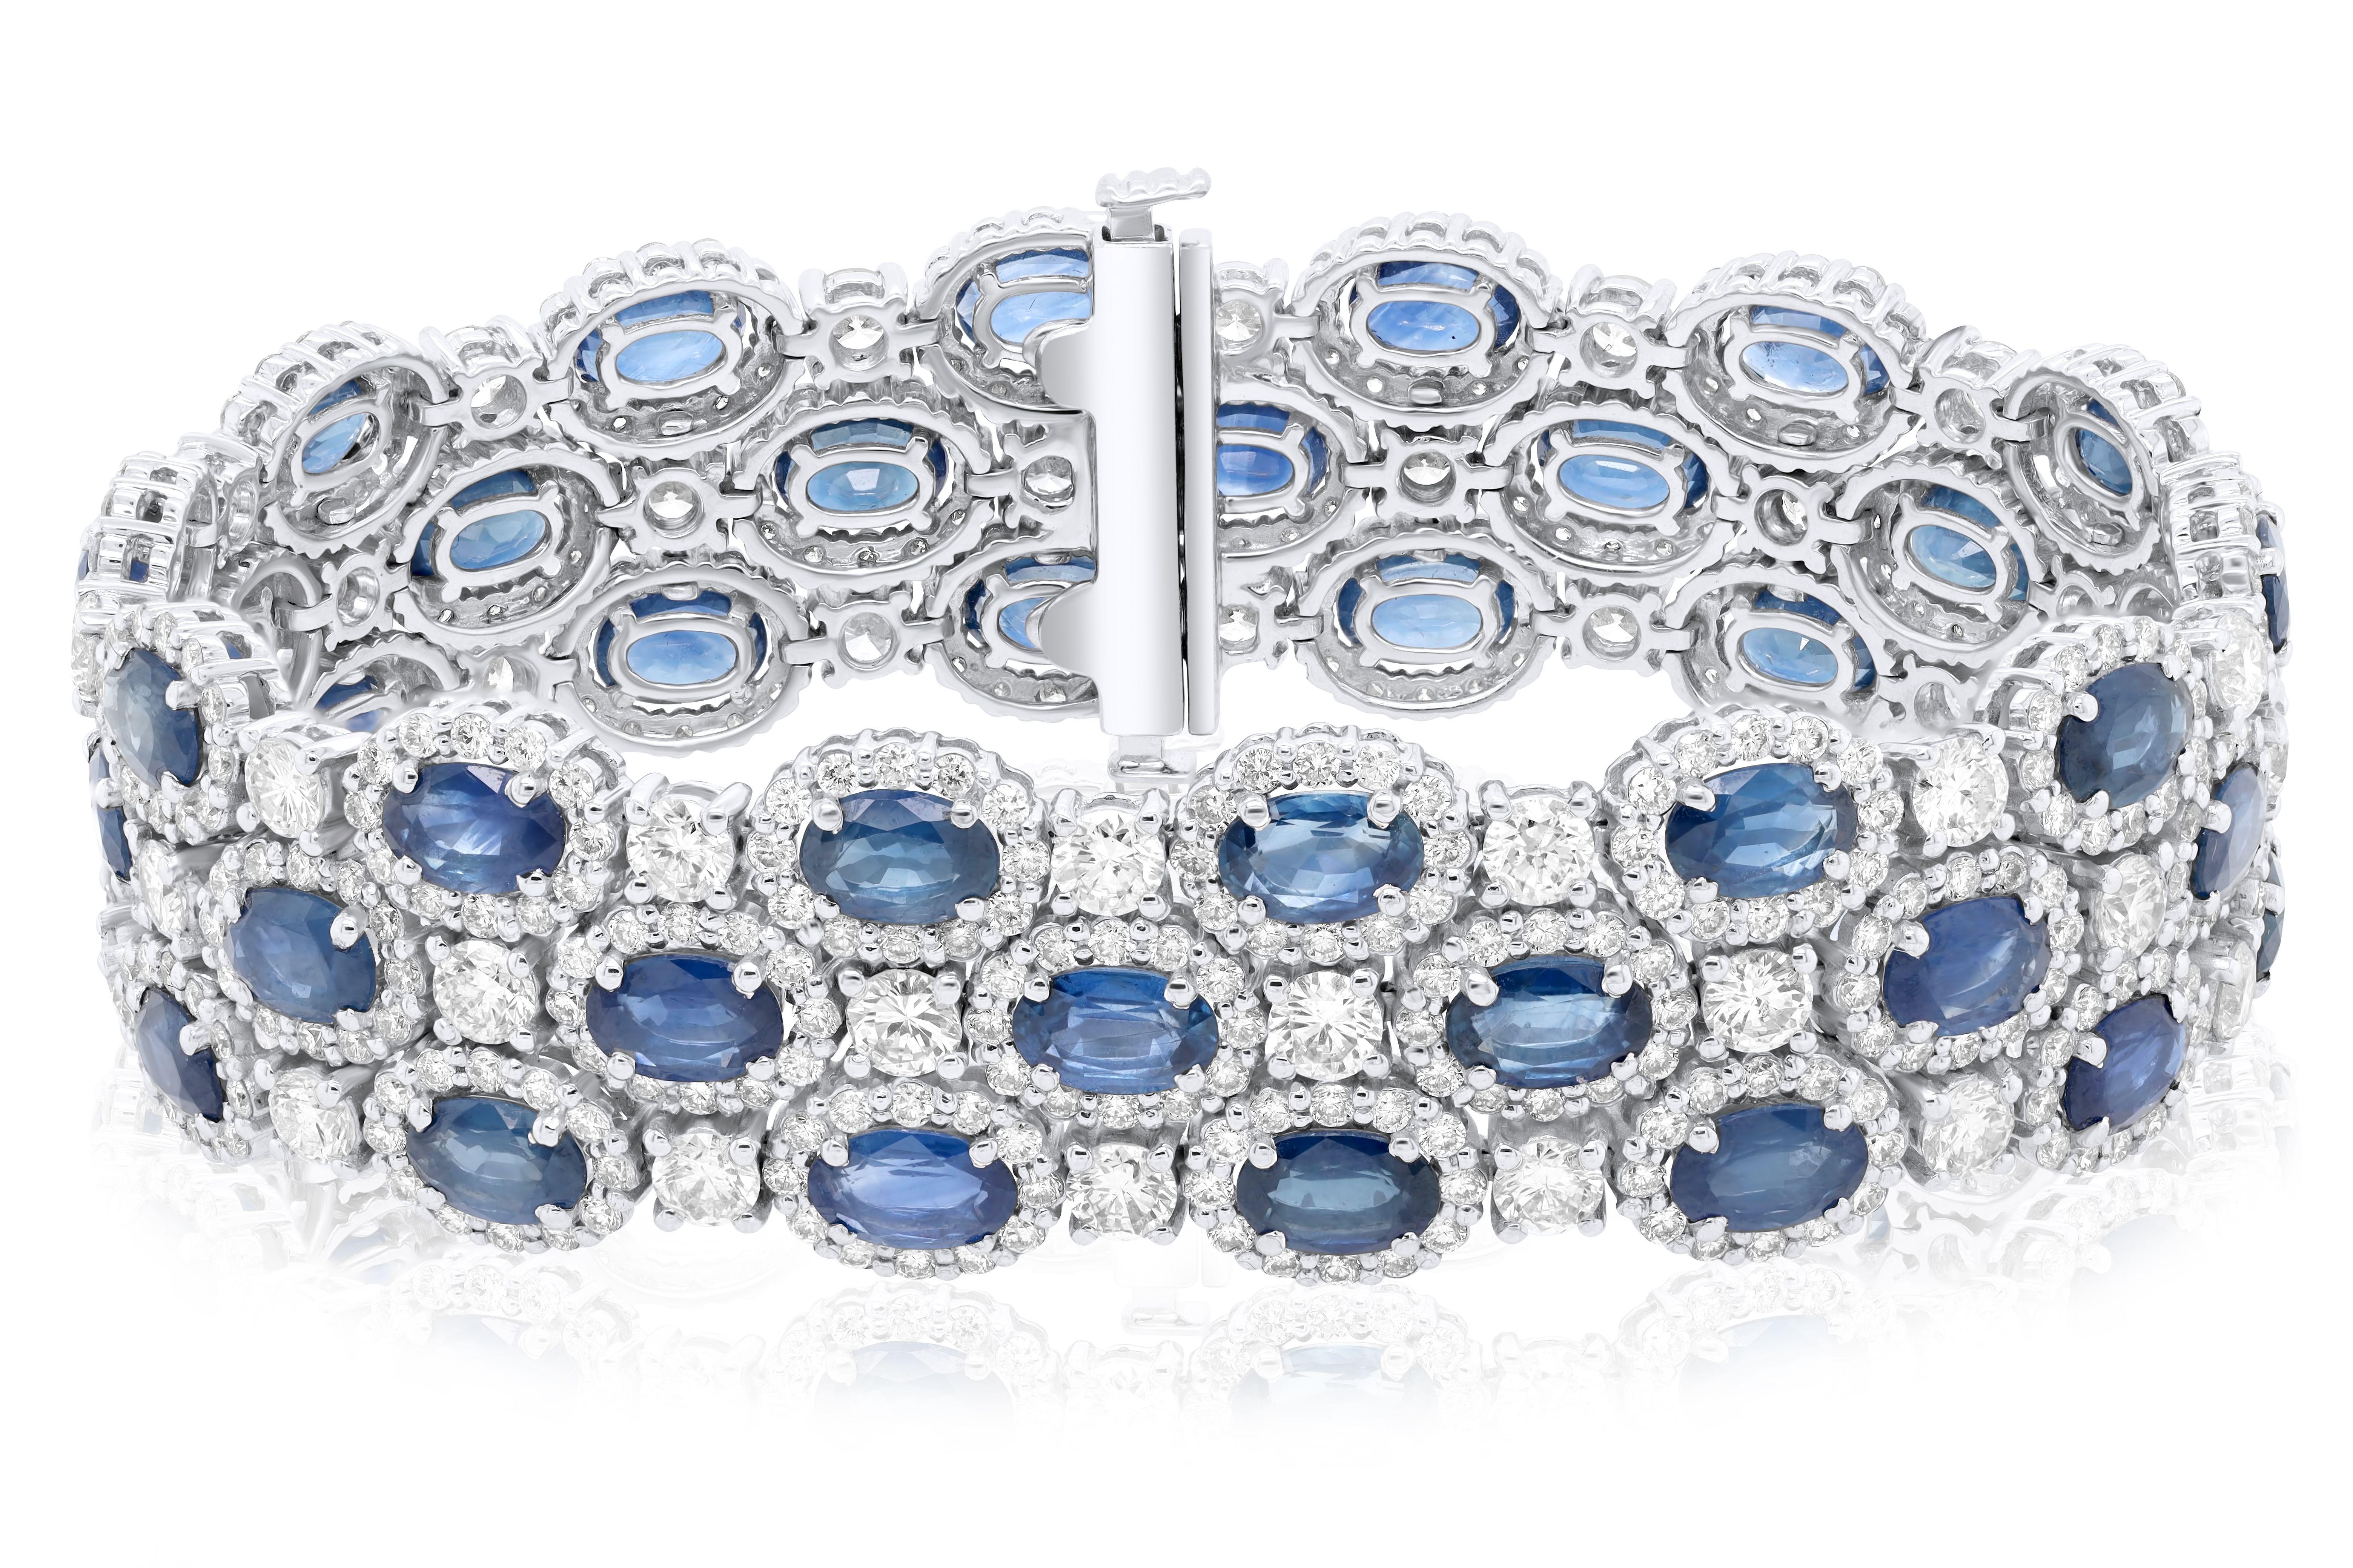 18 kt white gold bracelet adorned with 22.91 cts tw of oval cut sapphires surrounded and separated by 11.64 cts tw of diamonds packed hexagonally